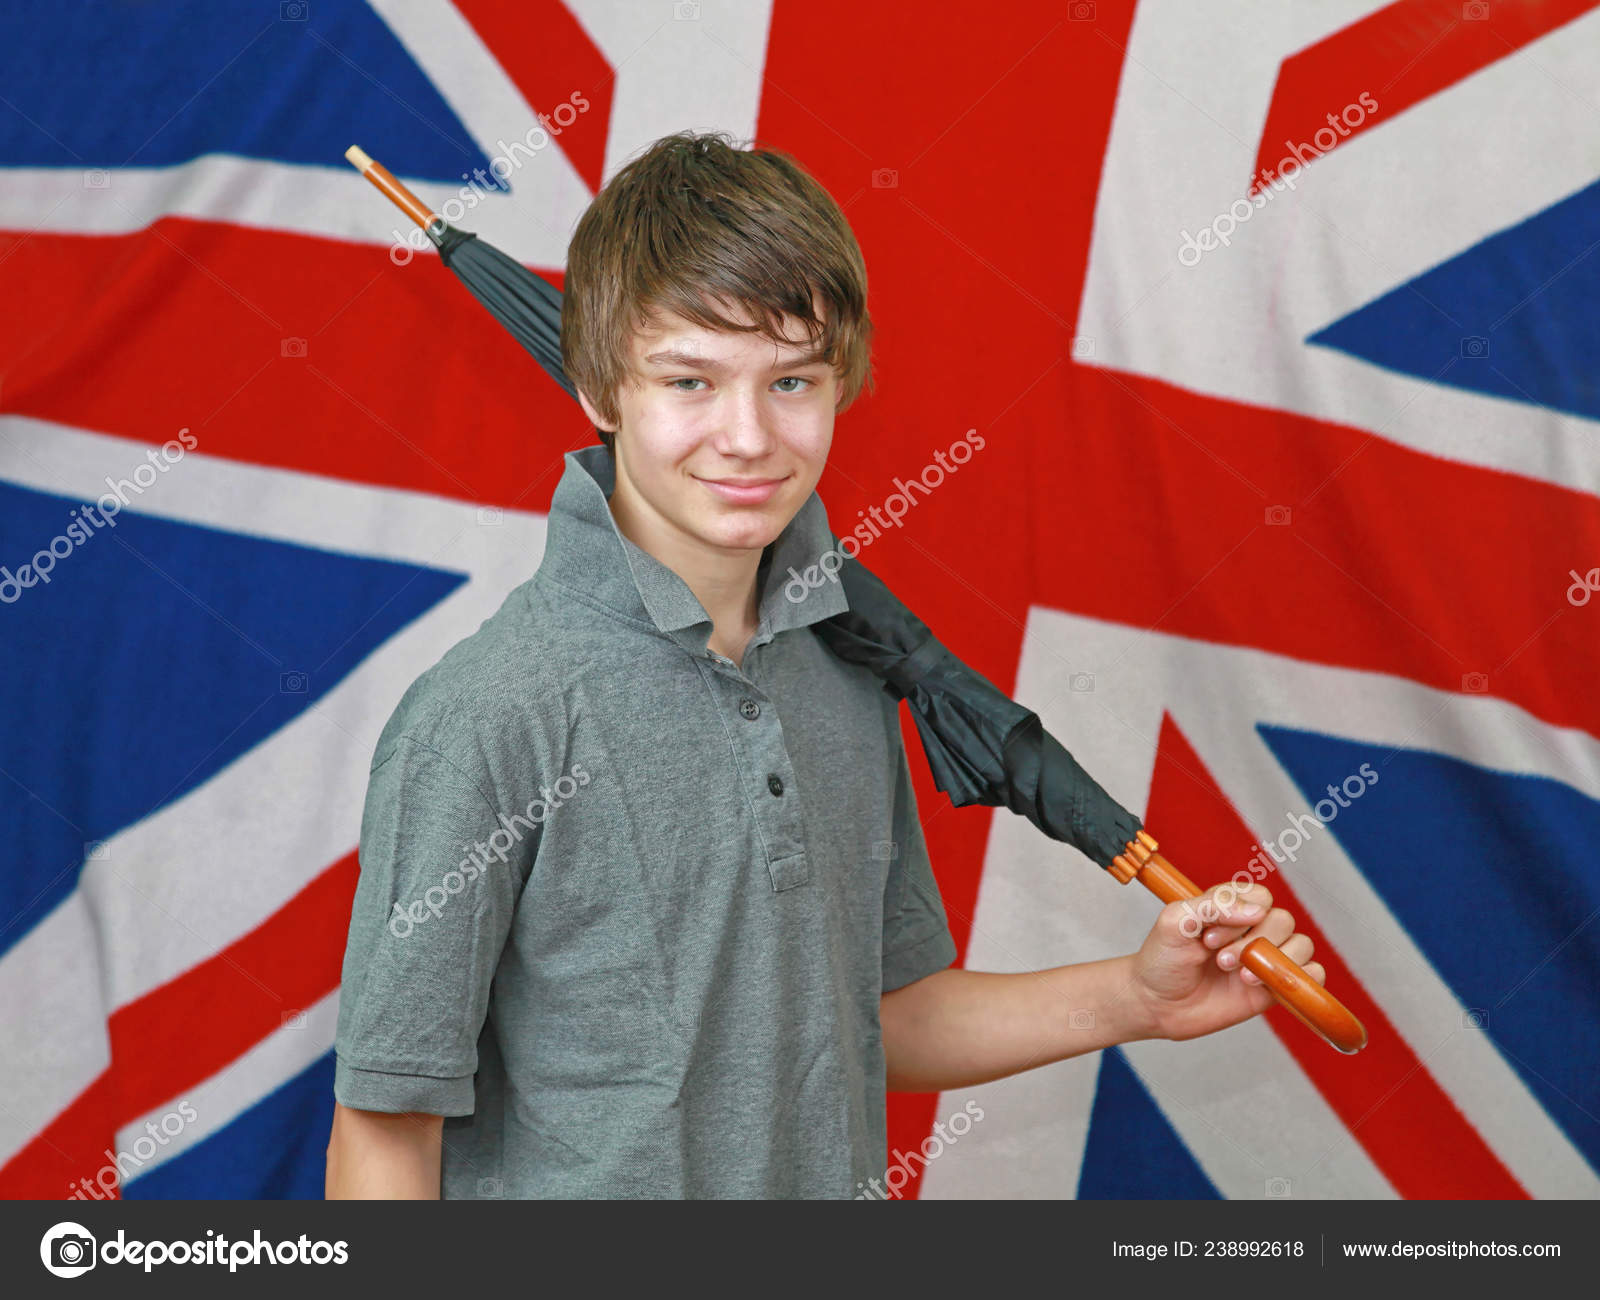 Young British Boy Umbrella Front Union Jack Flag Stock Photo by ©Baloncici  238992618